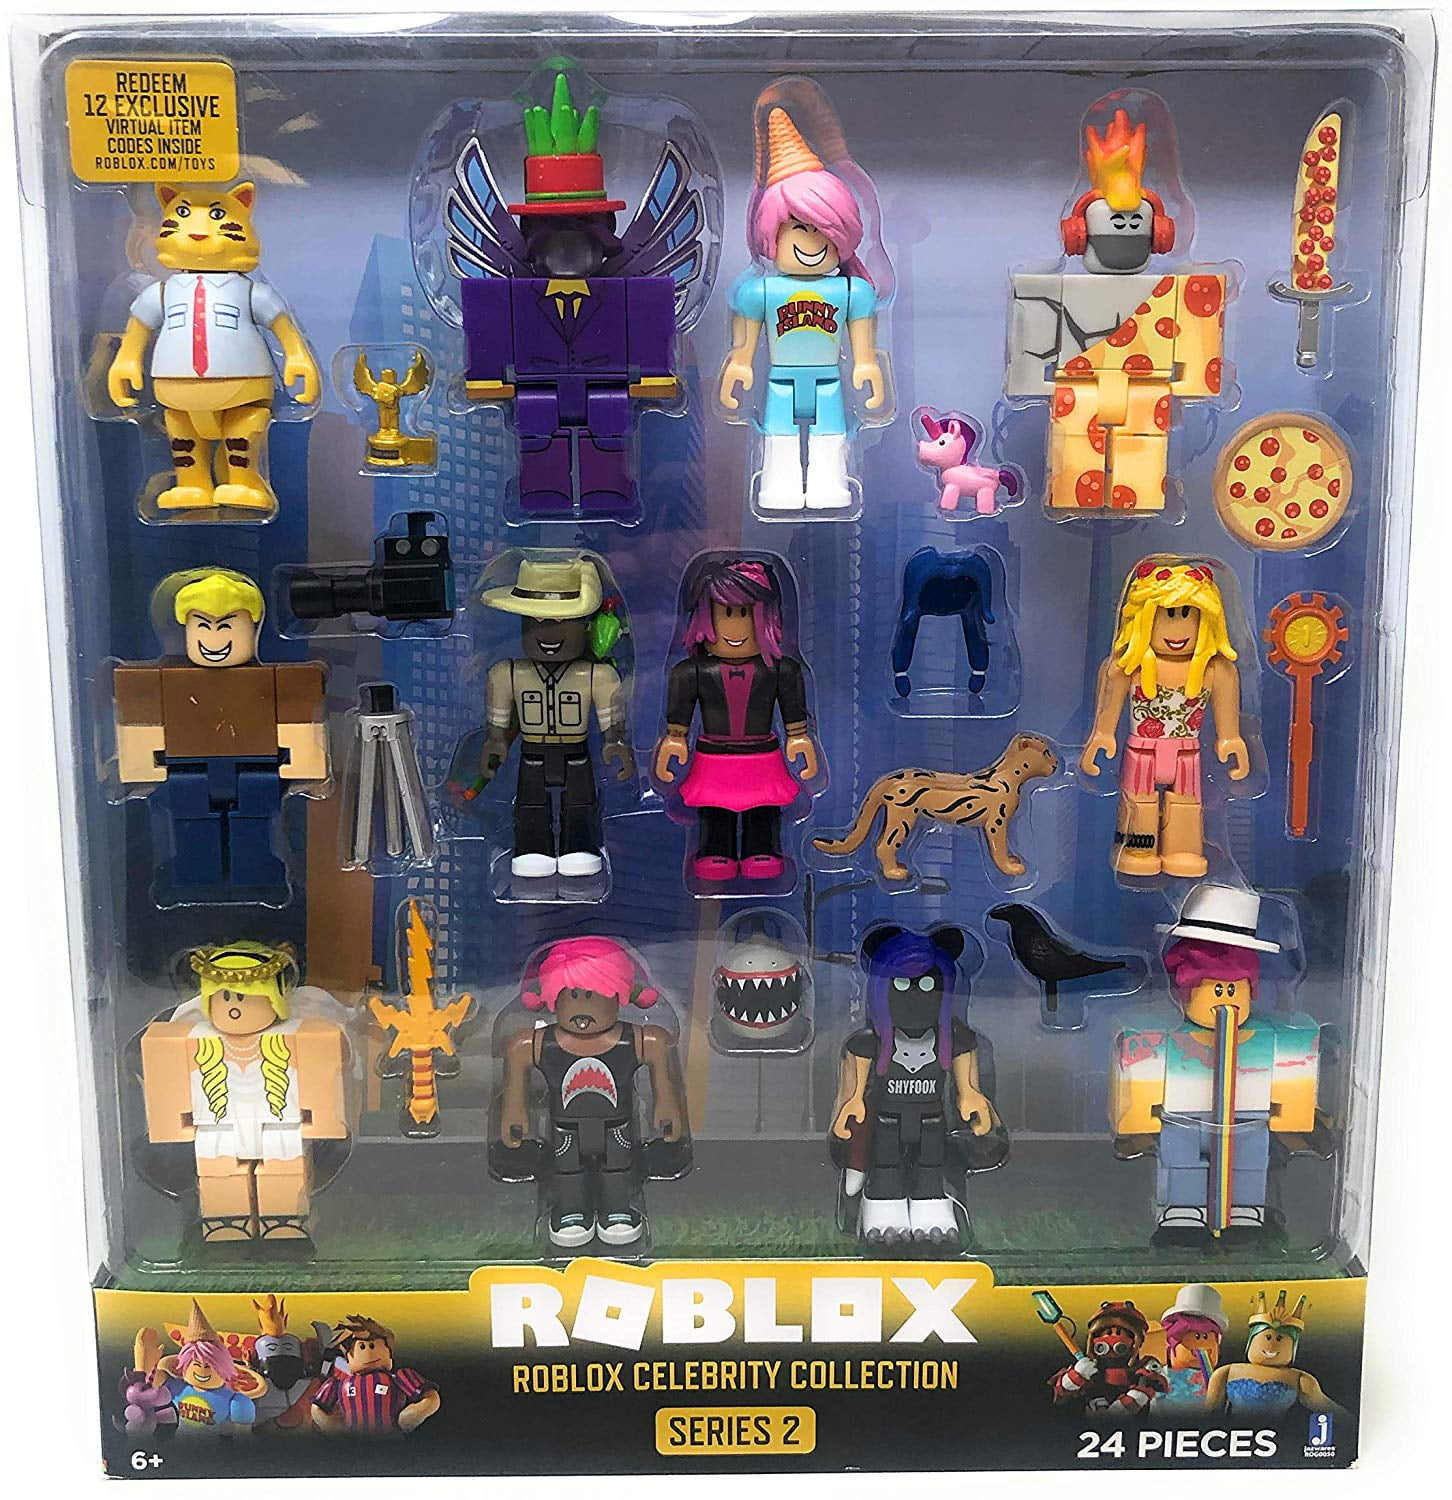 Roblox Series 2 Roblox Celebrity Collection 24 Piece Set Walmart Com Walmart Com - roblox celebrity collection fashion famous playset includes exclusive virtual item walmart com walmart com